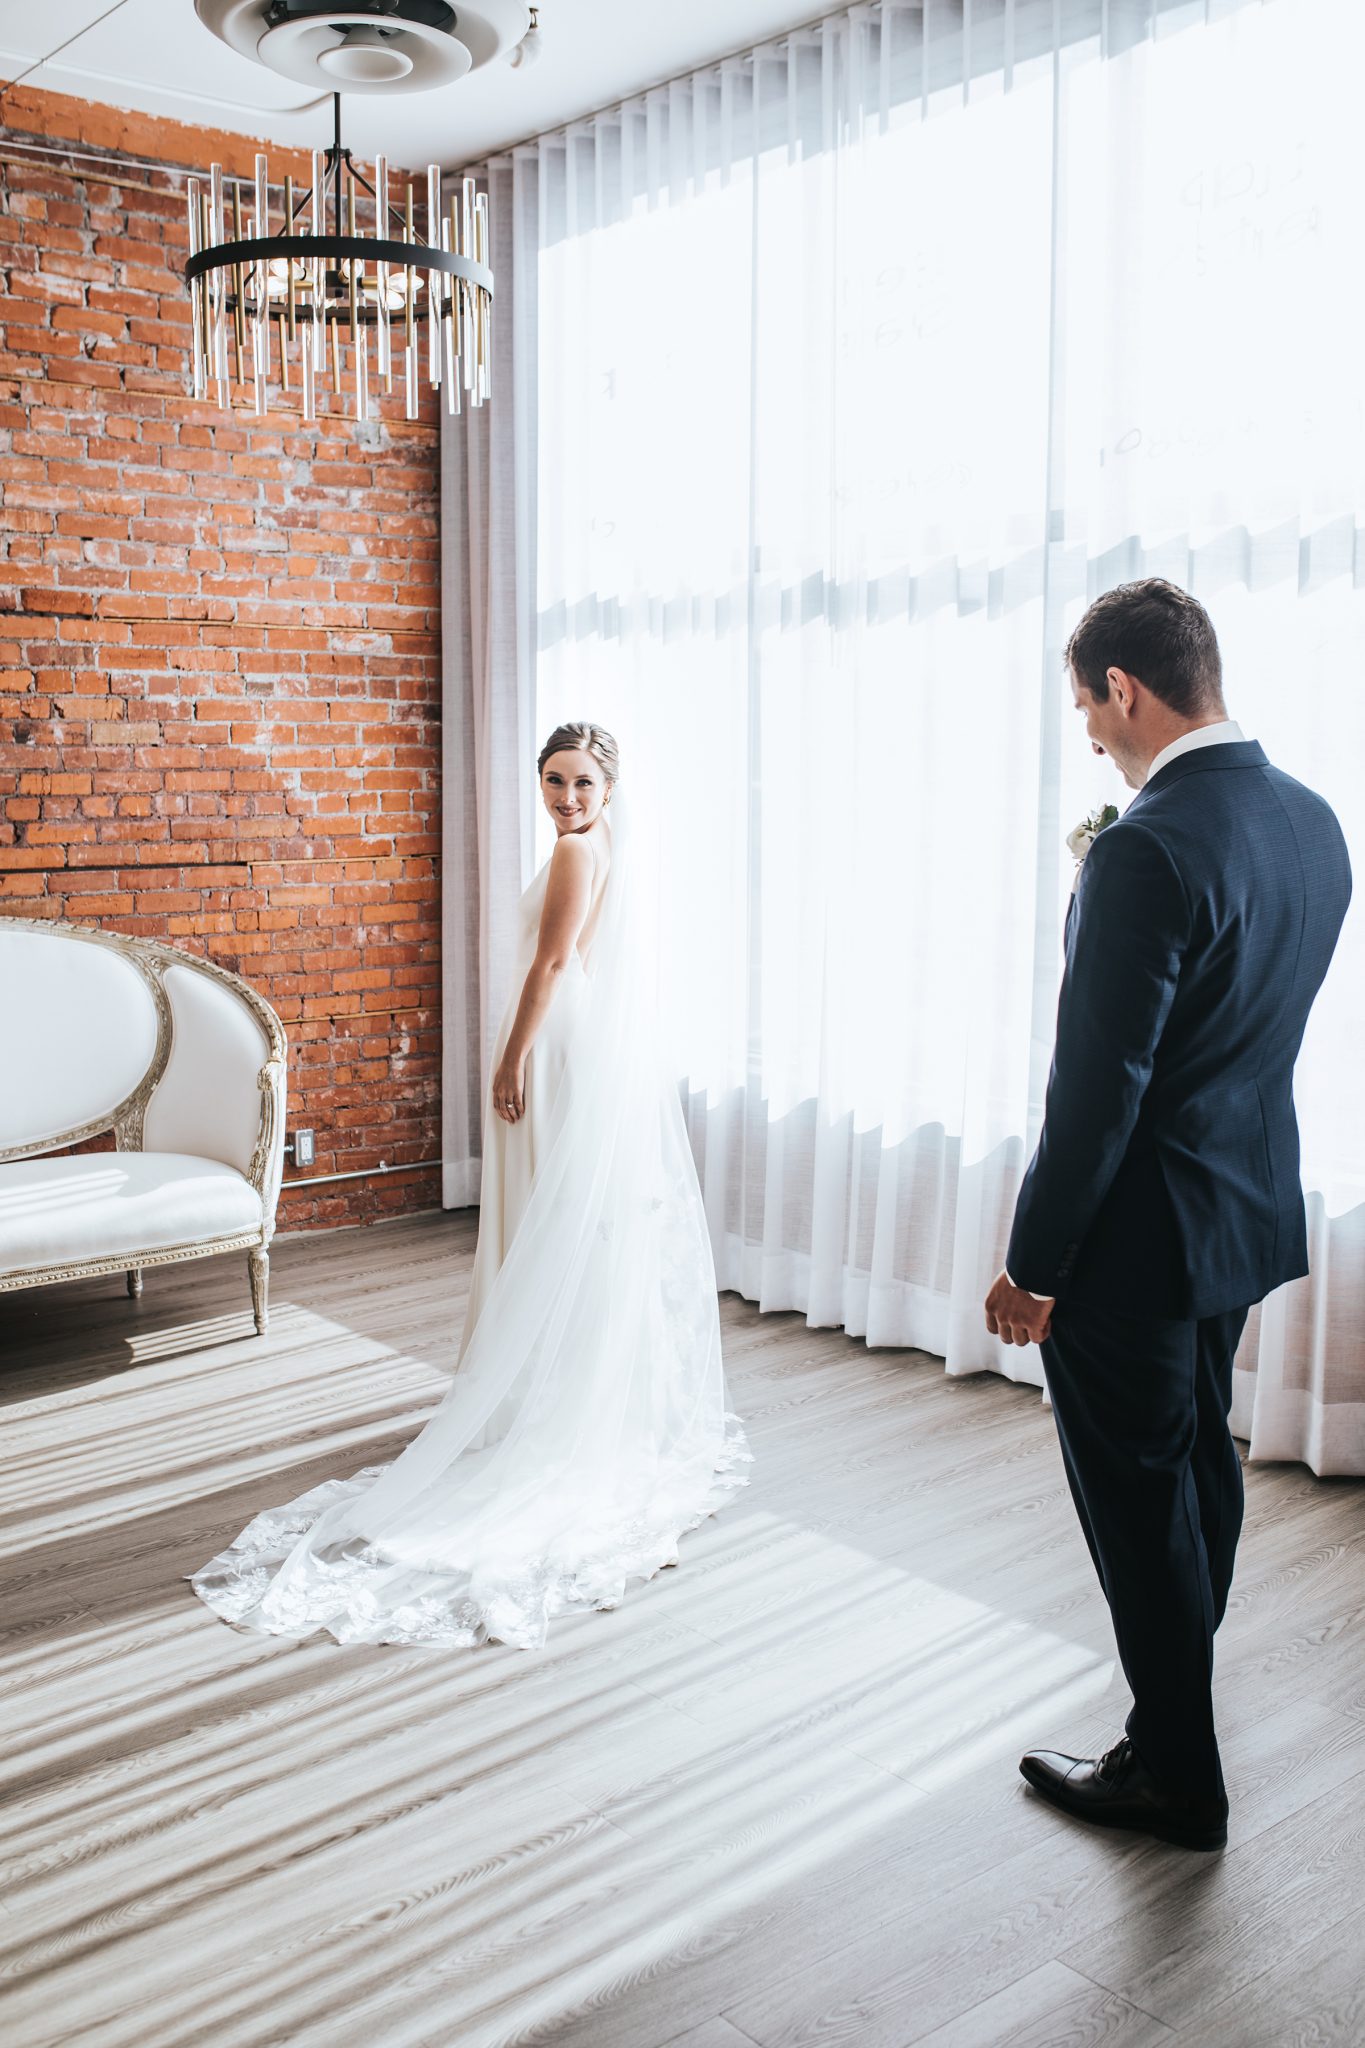 Wedding at Venue 308, first look, bridal inspiration